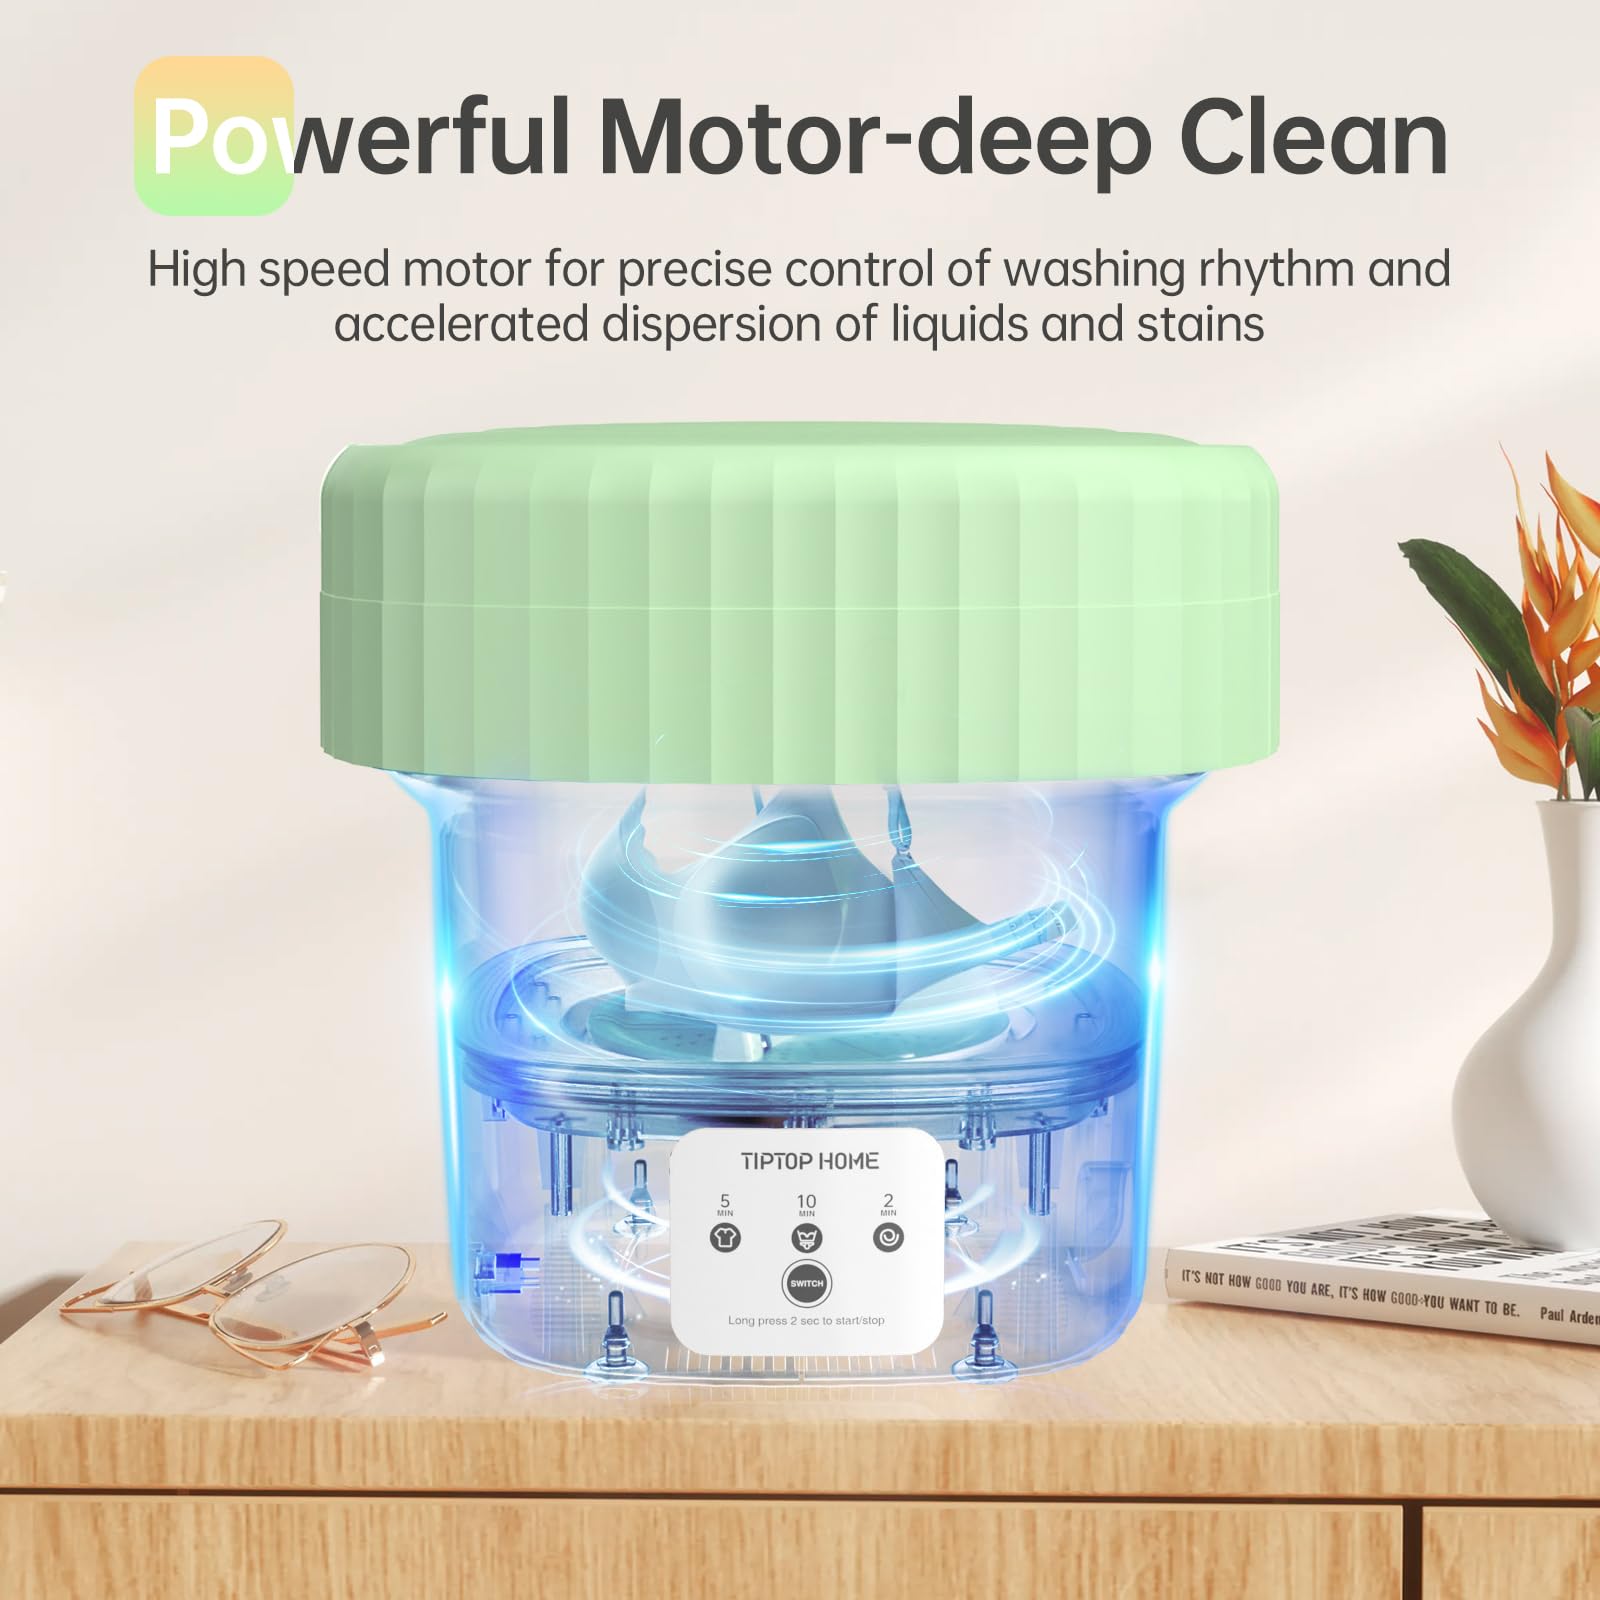 Portable Washing Machine, 6L Foldable Mini Washing Machine, Compact Travel Washing Machine for Small Items Baby Clothes Underwear Socks Towels Apartment Dorm Camping RV Travel Laundry